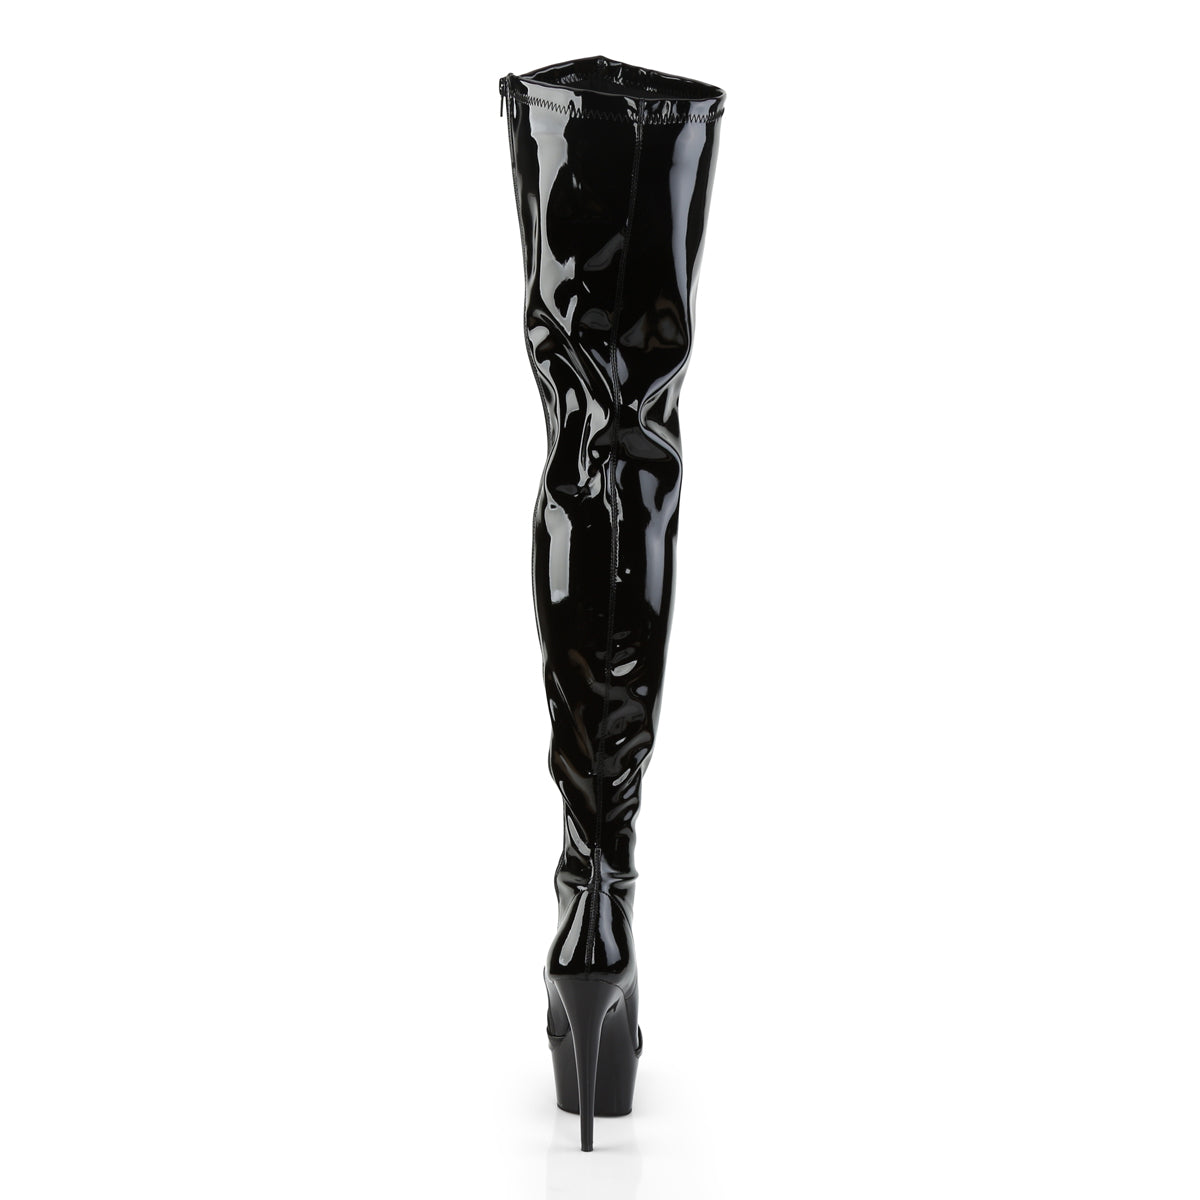 DELIGHT-4000 6" Heel Black Stretch Patent Pole Dancer Boots-Pleaser- Sexy Shoes Fetish Footwear